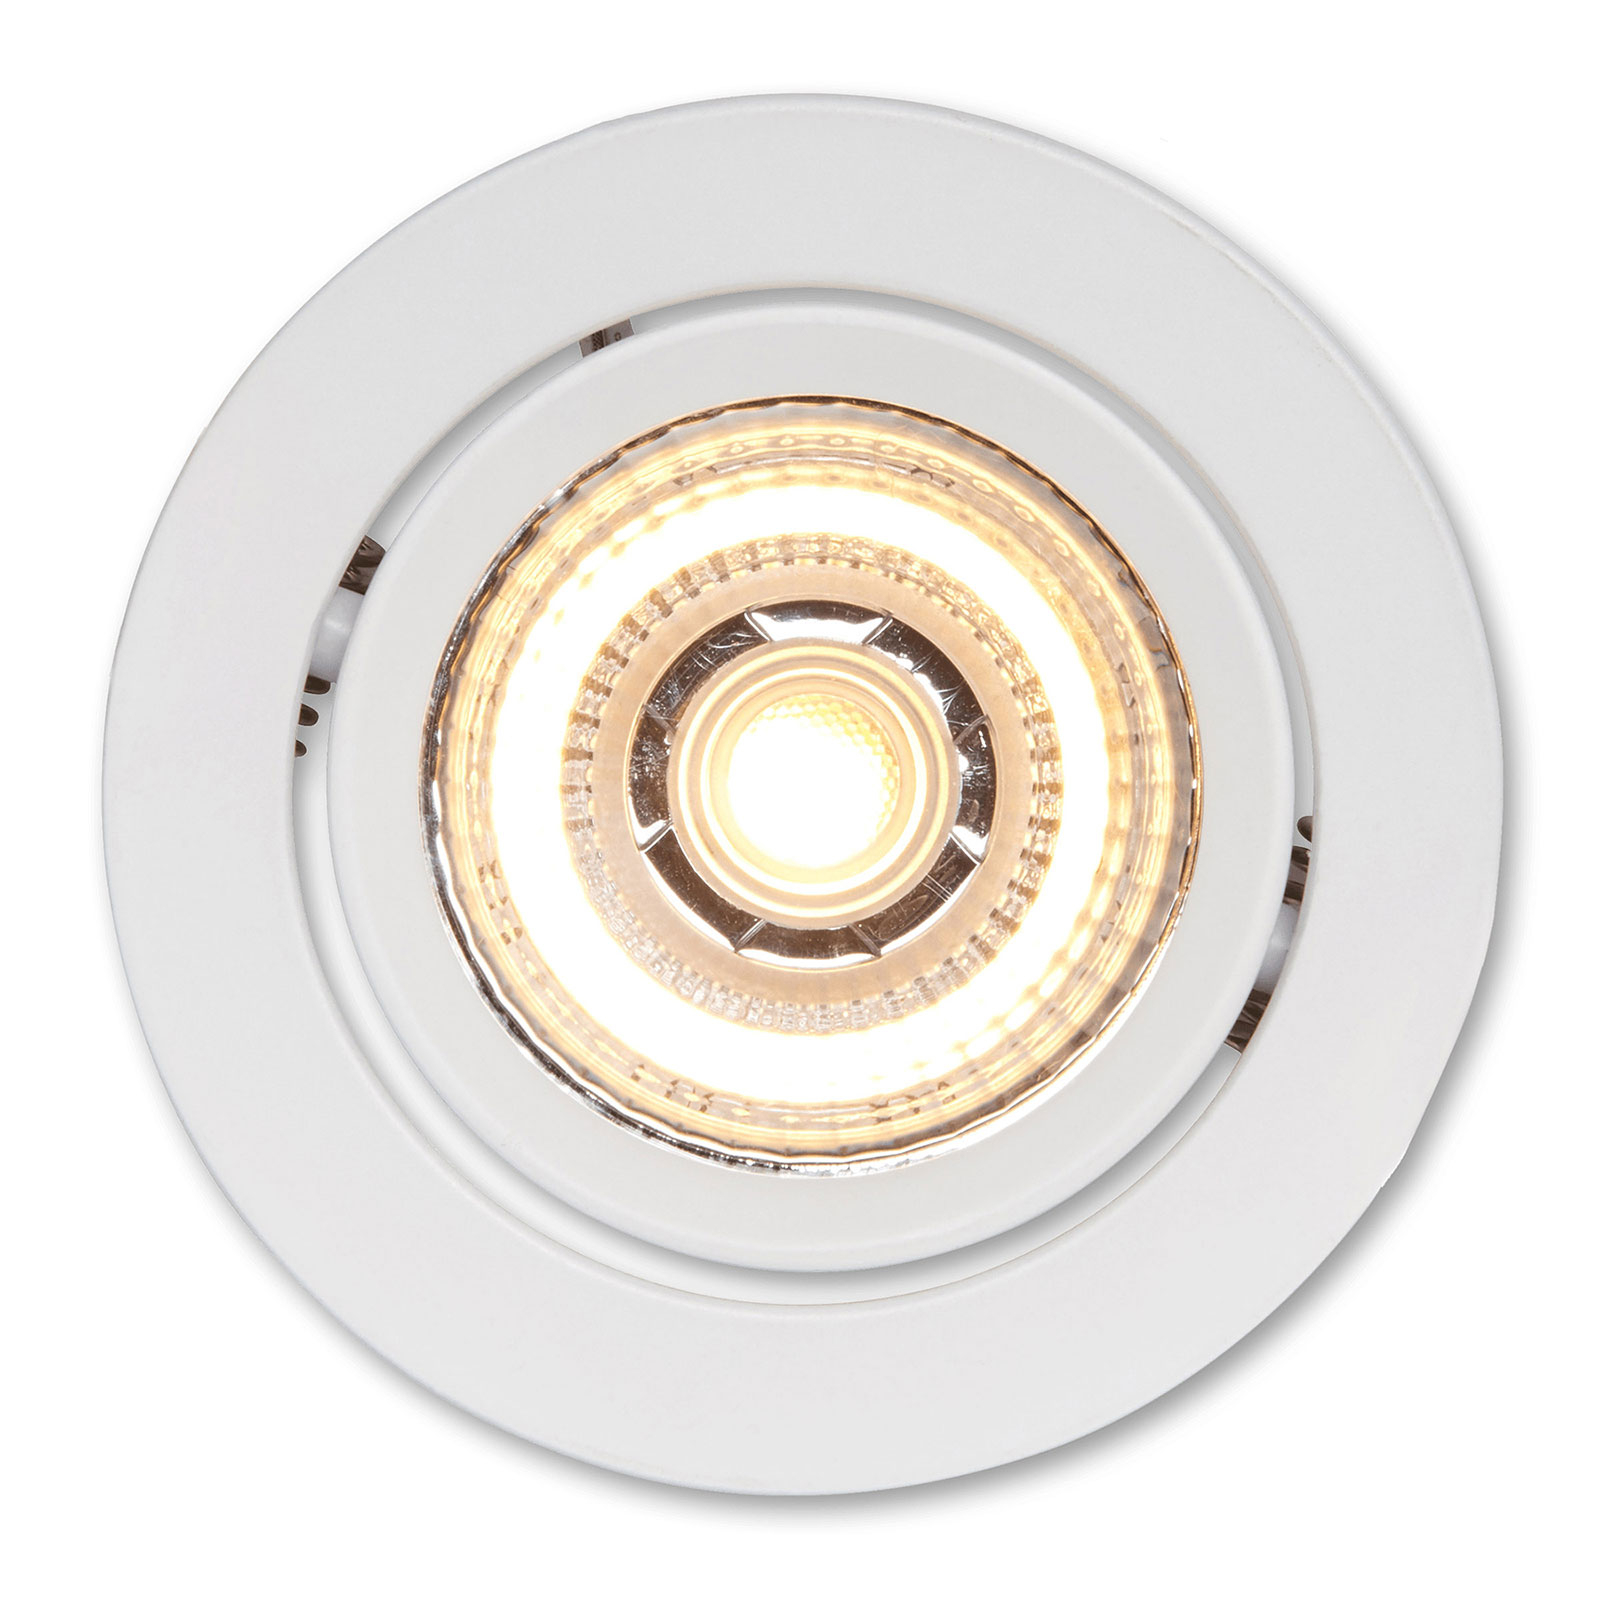 Innr RSL 115 LED downlight 3-pack with connection